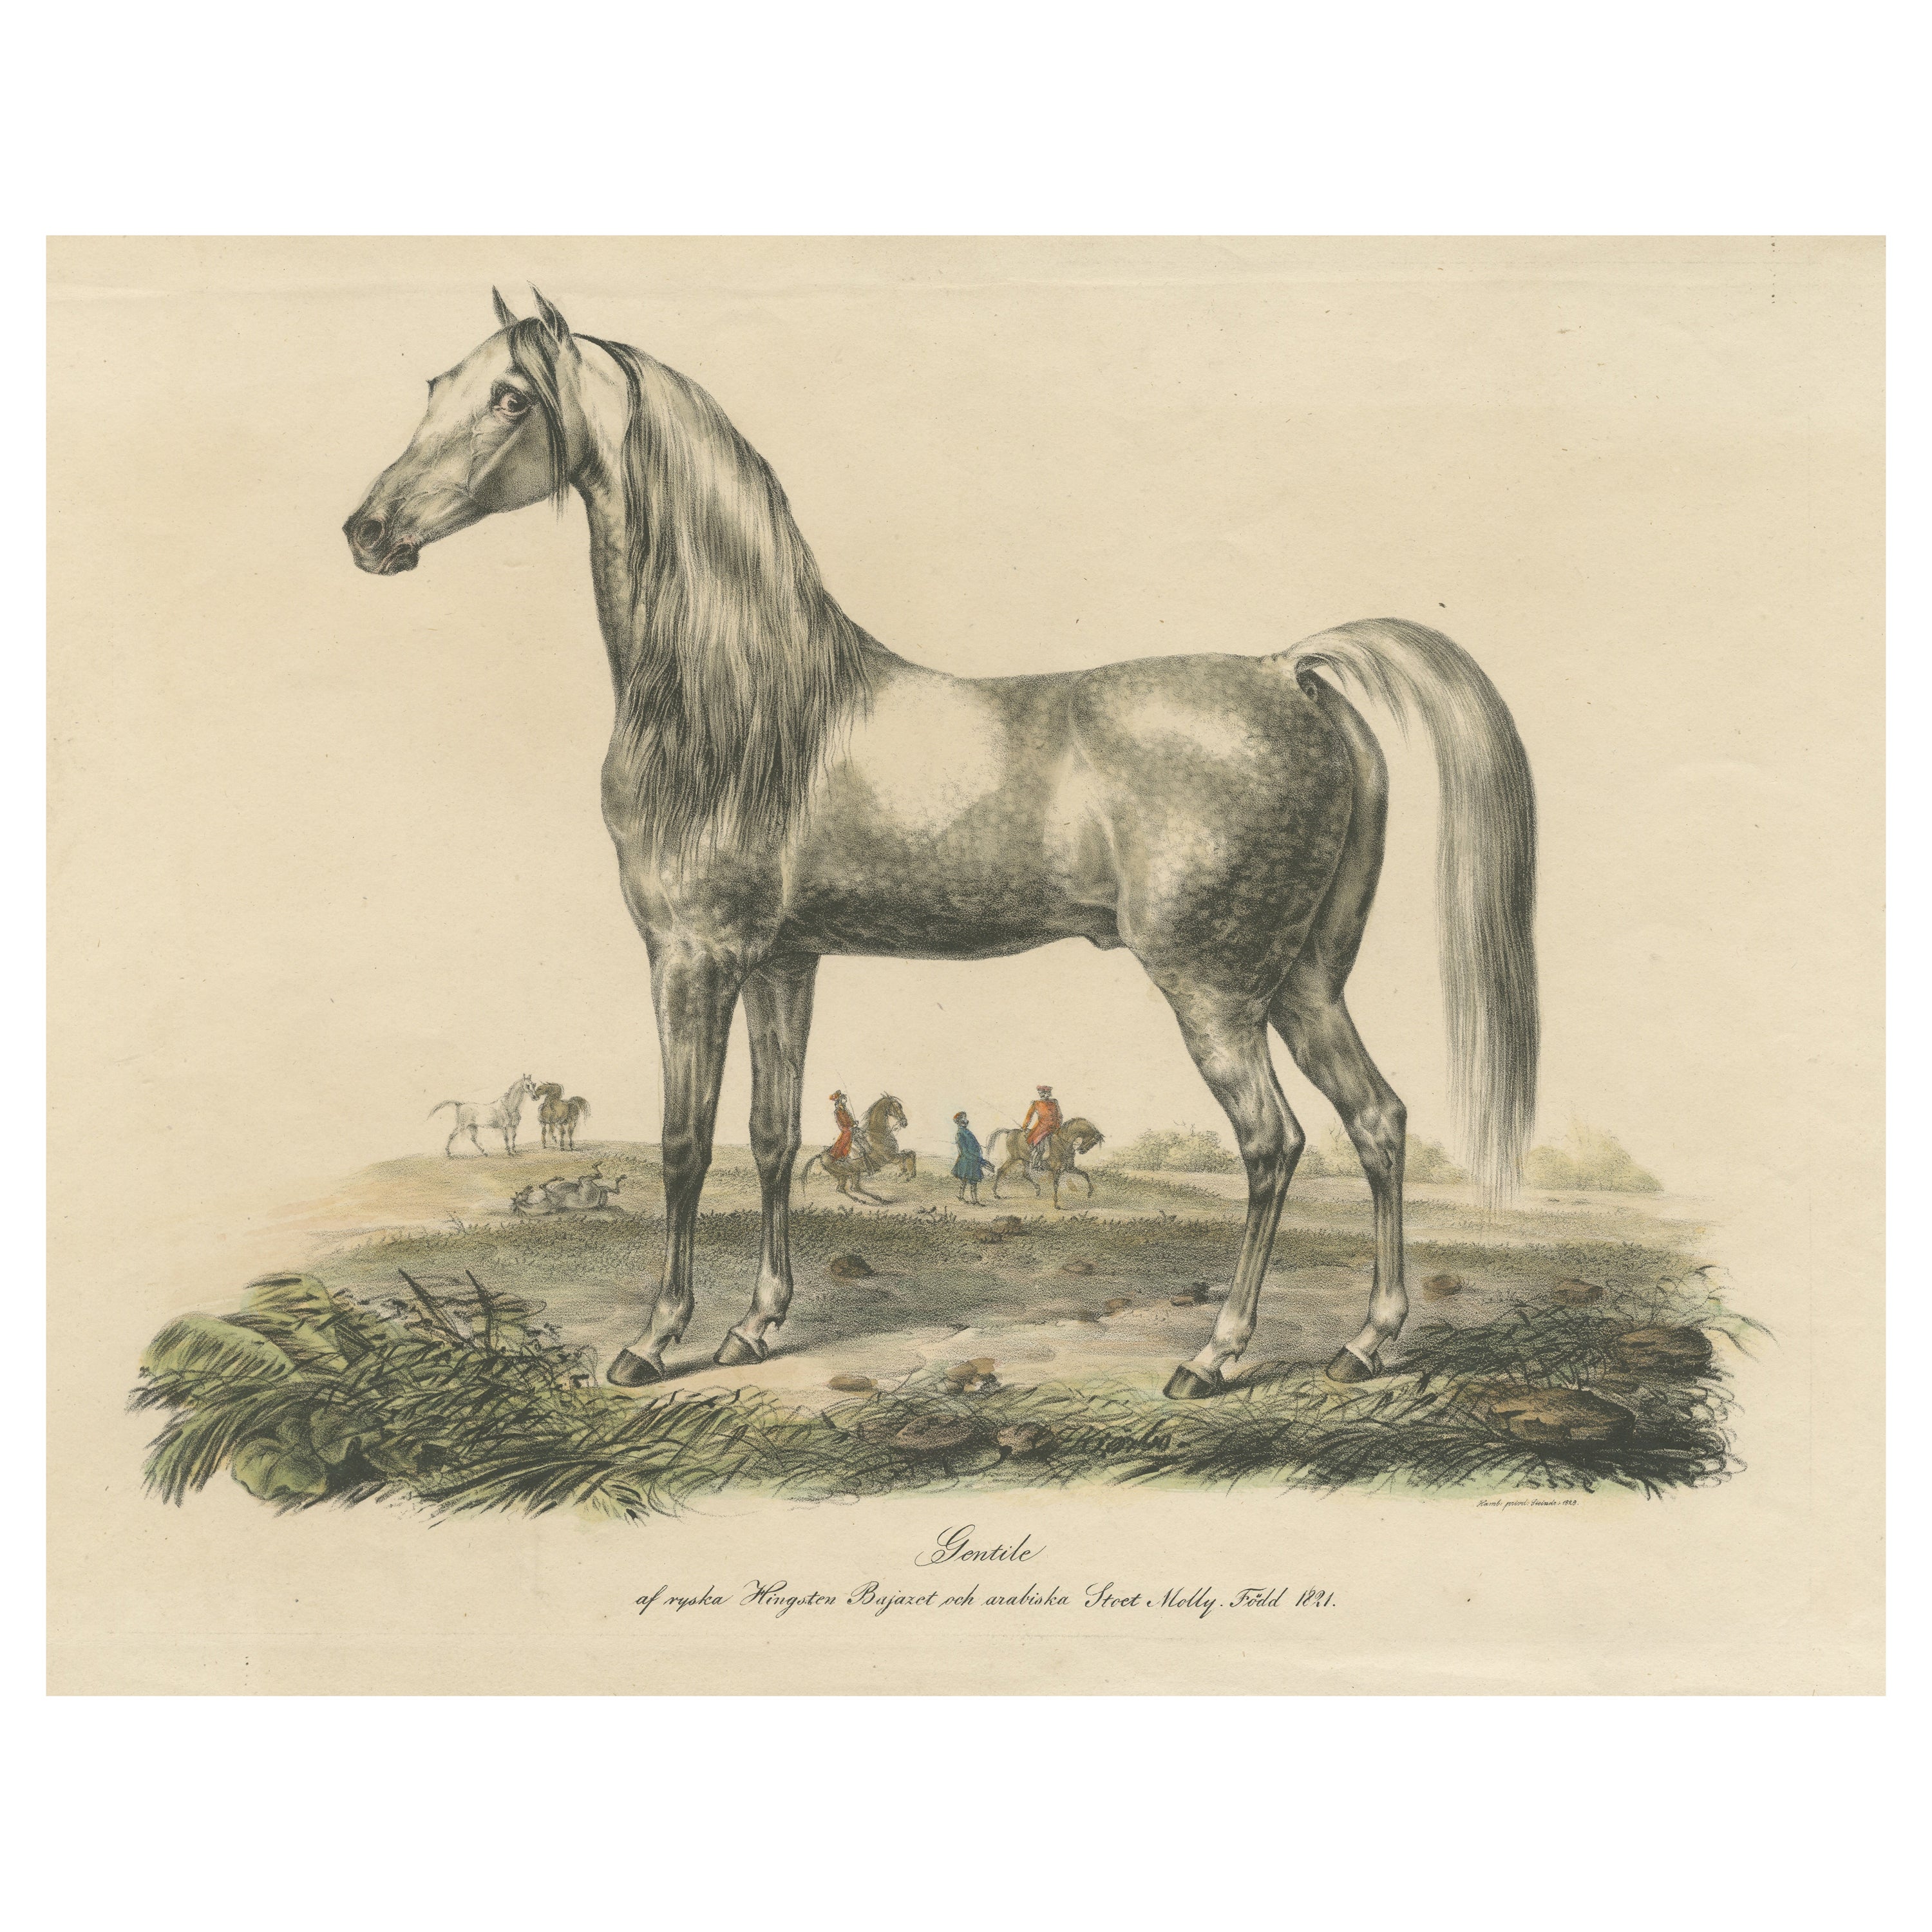 Antique Print of an Arabic Horse Named Gentile